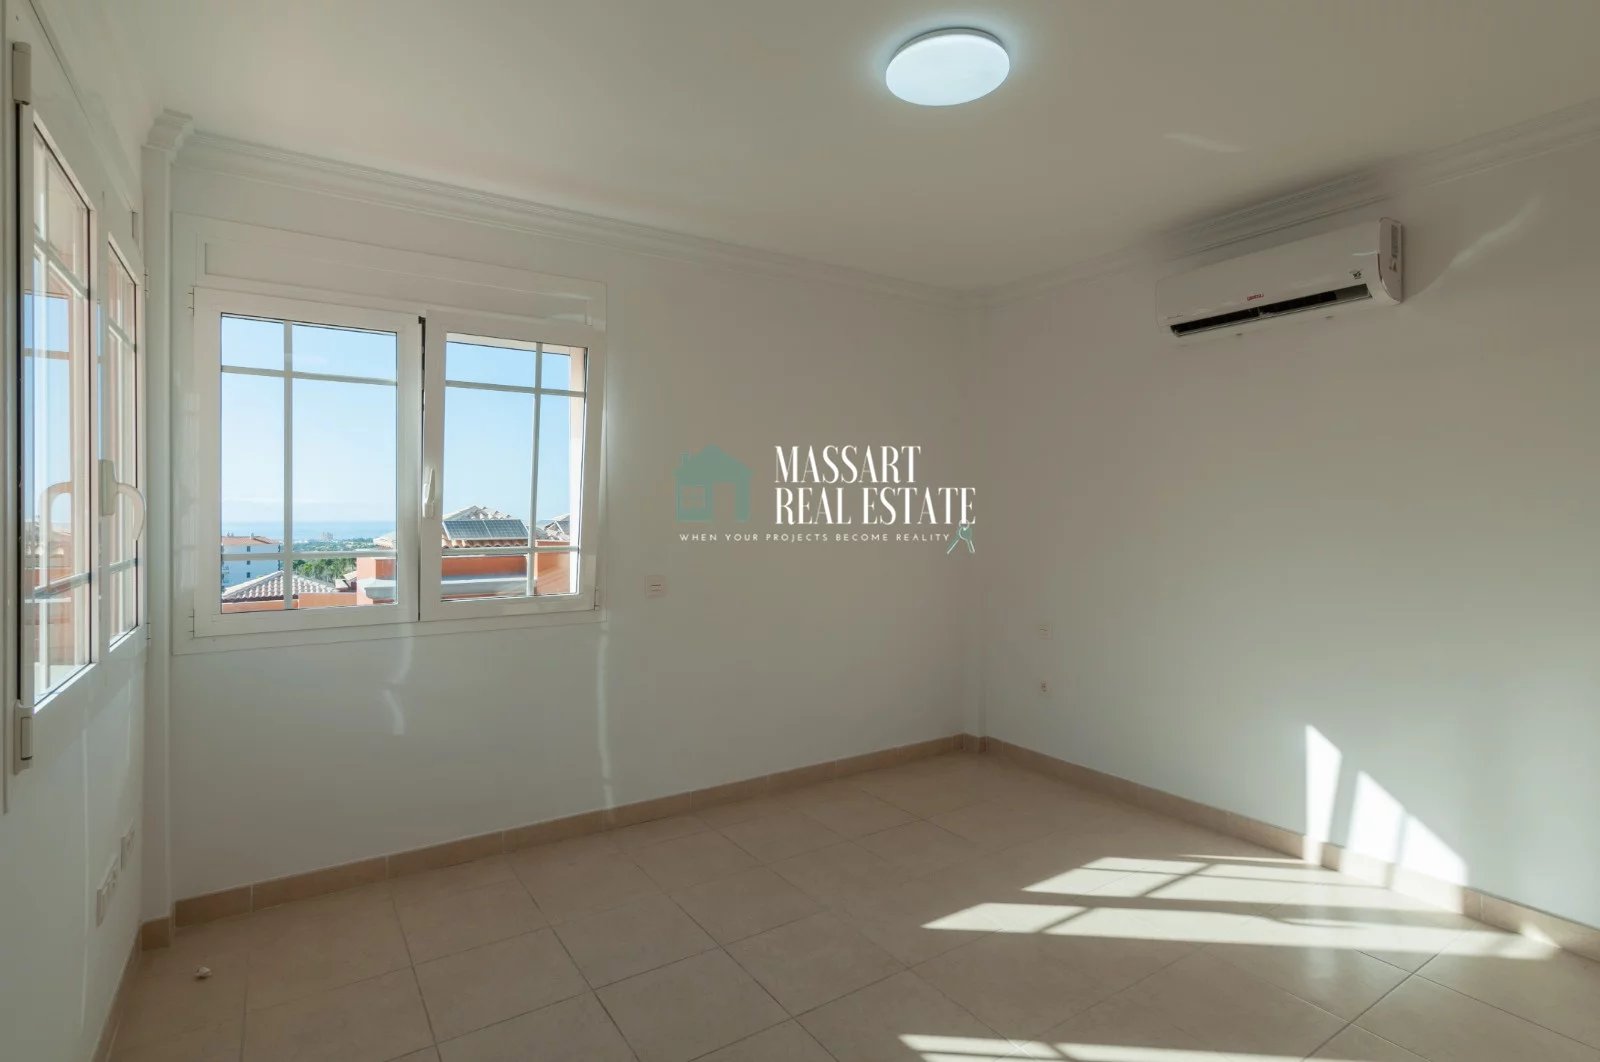 Detached villa distributed over three floors and located in the new residential area of Los Cristianos.